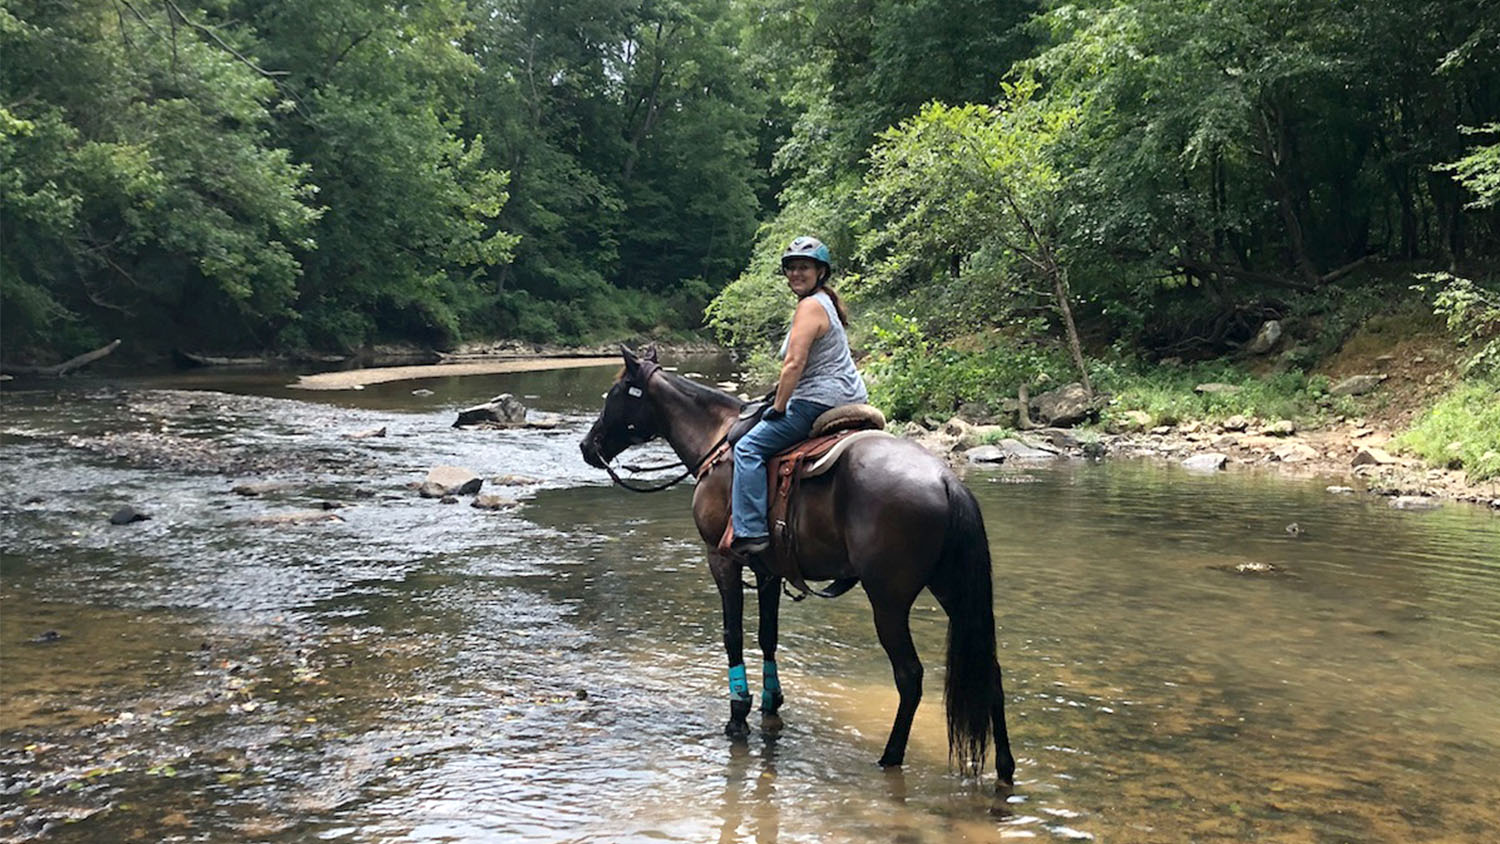 Horse Back Riding - Forests and Facilities - Forestry and Environmental Resources NC State University